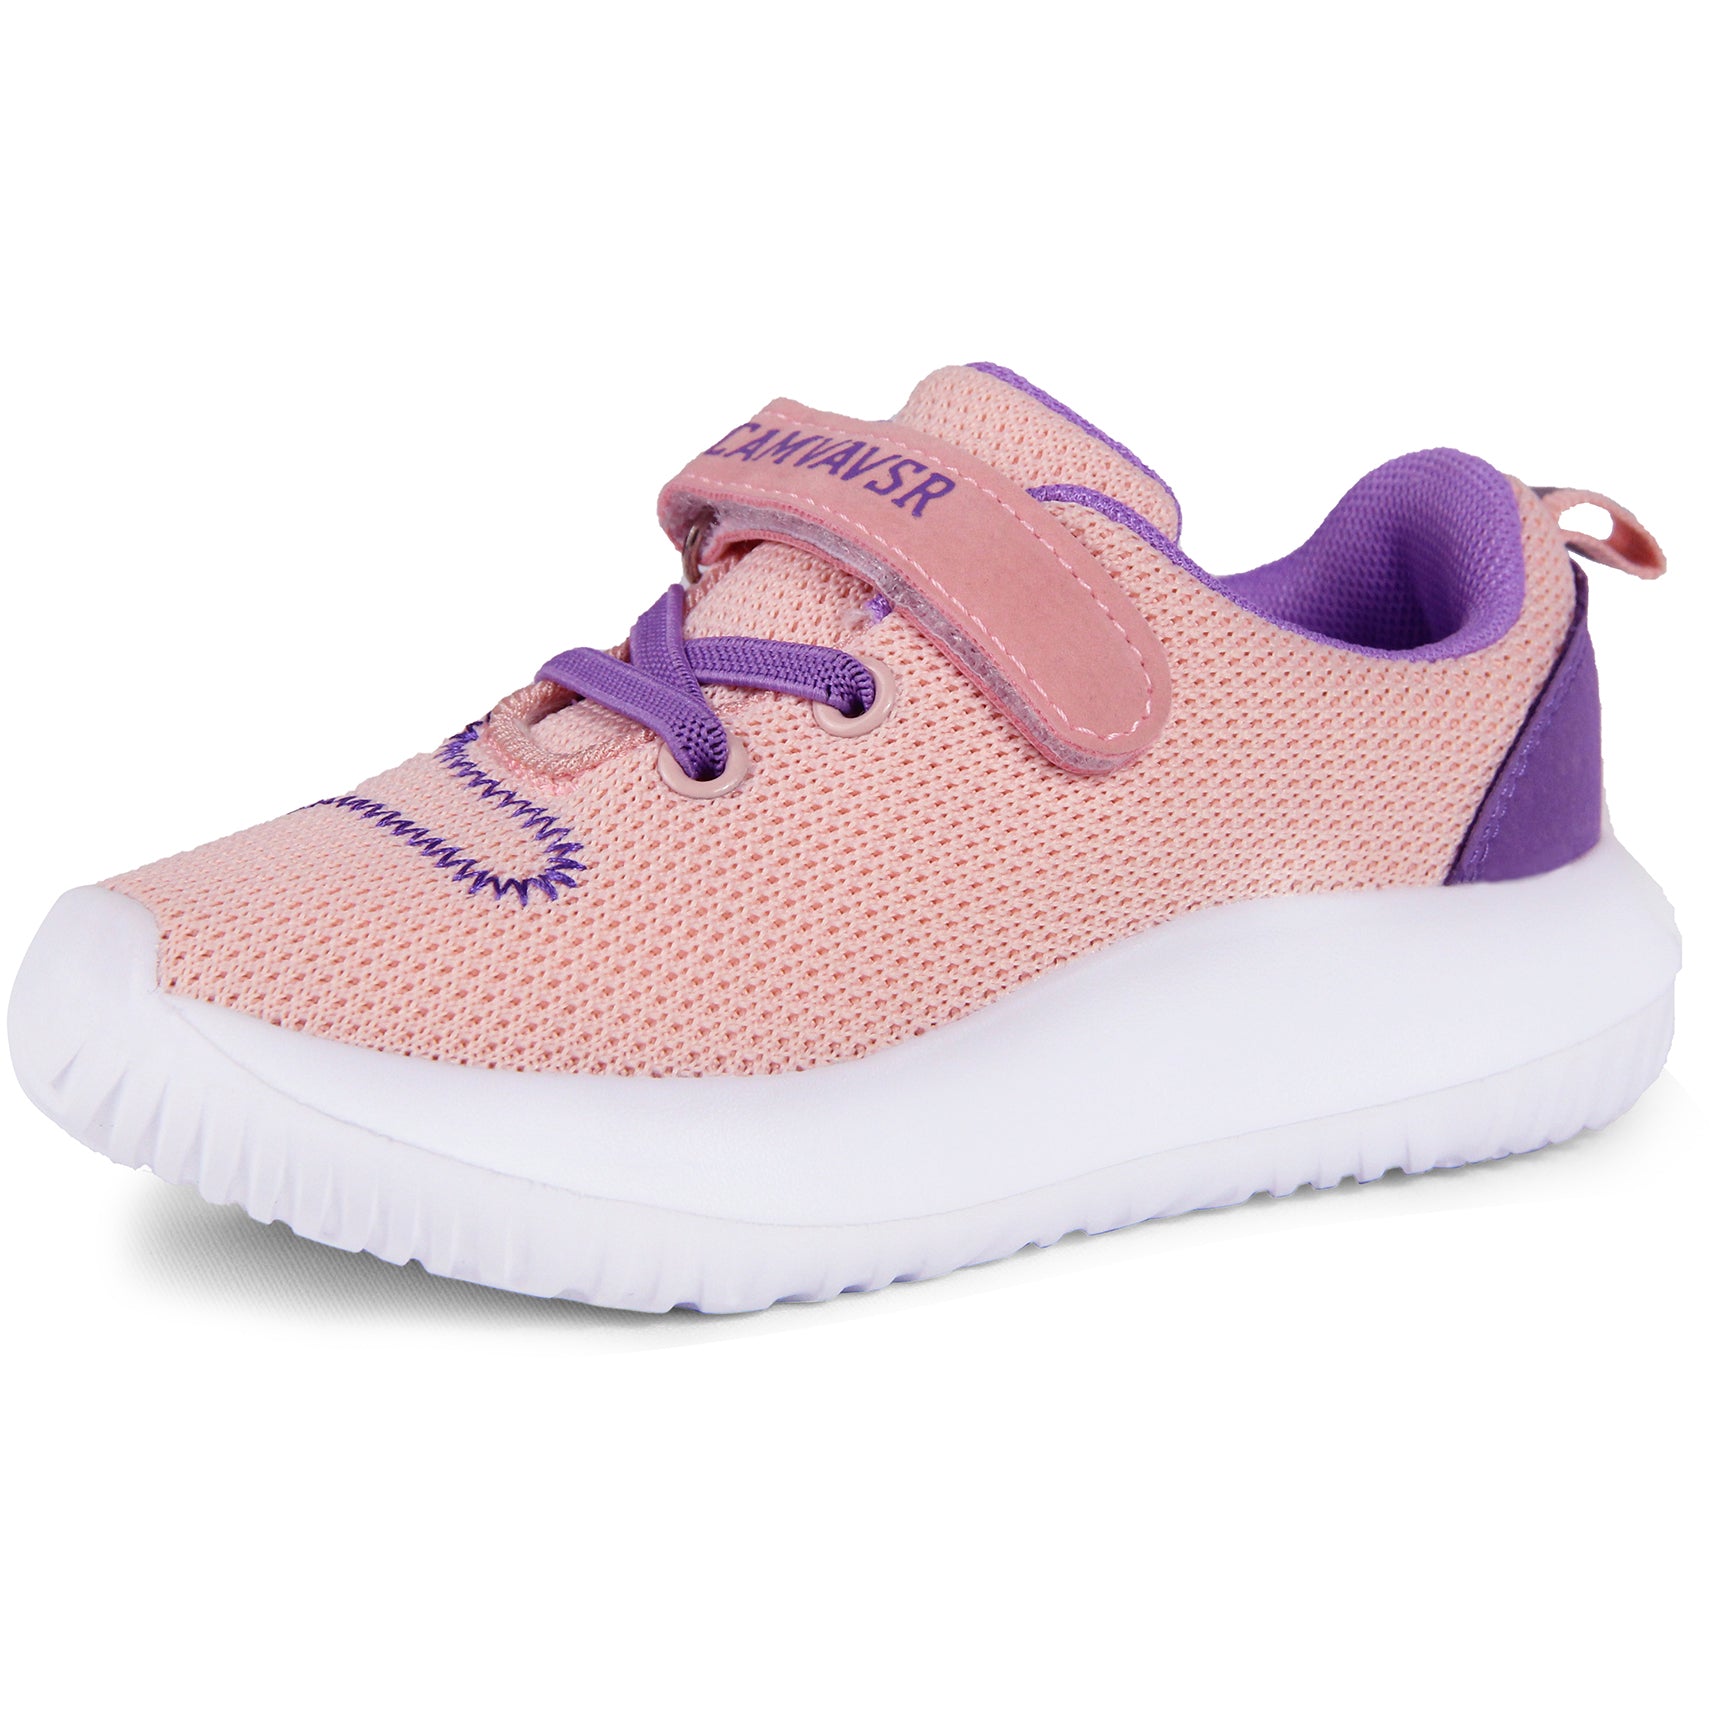 10.83US $ 35% OFF|Baby Toddler Shoes Children Sports Shoes New Spring Kids  Sneakers For Girls Boys Net Breathable Non-slip Leisure Size 21-30 -  Children C… | Одежда